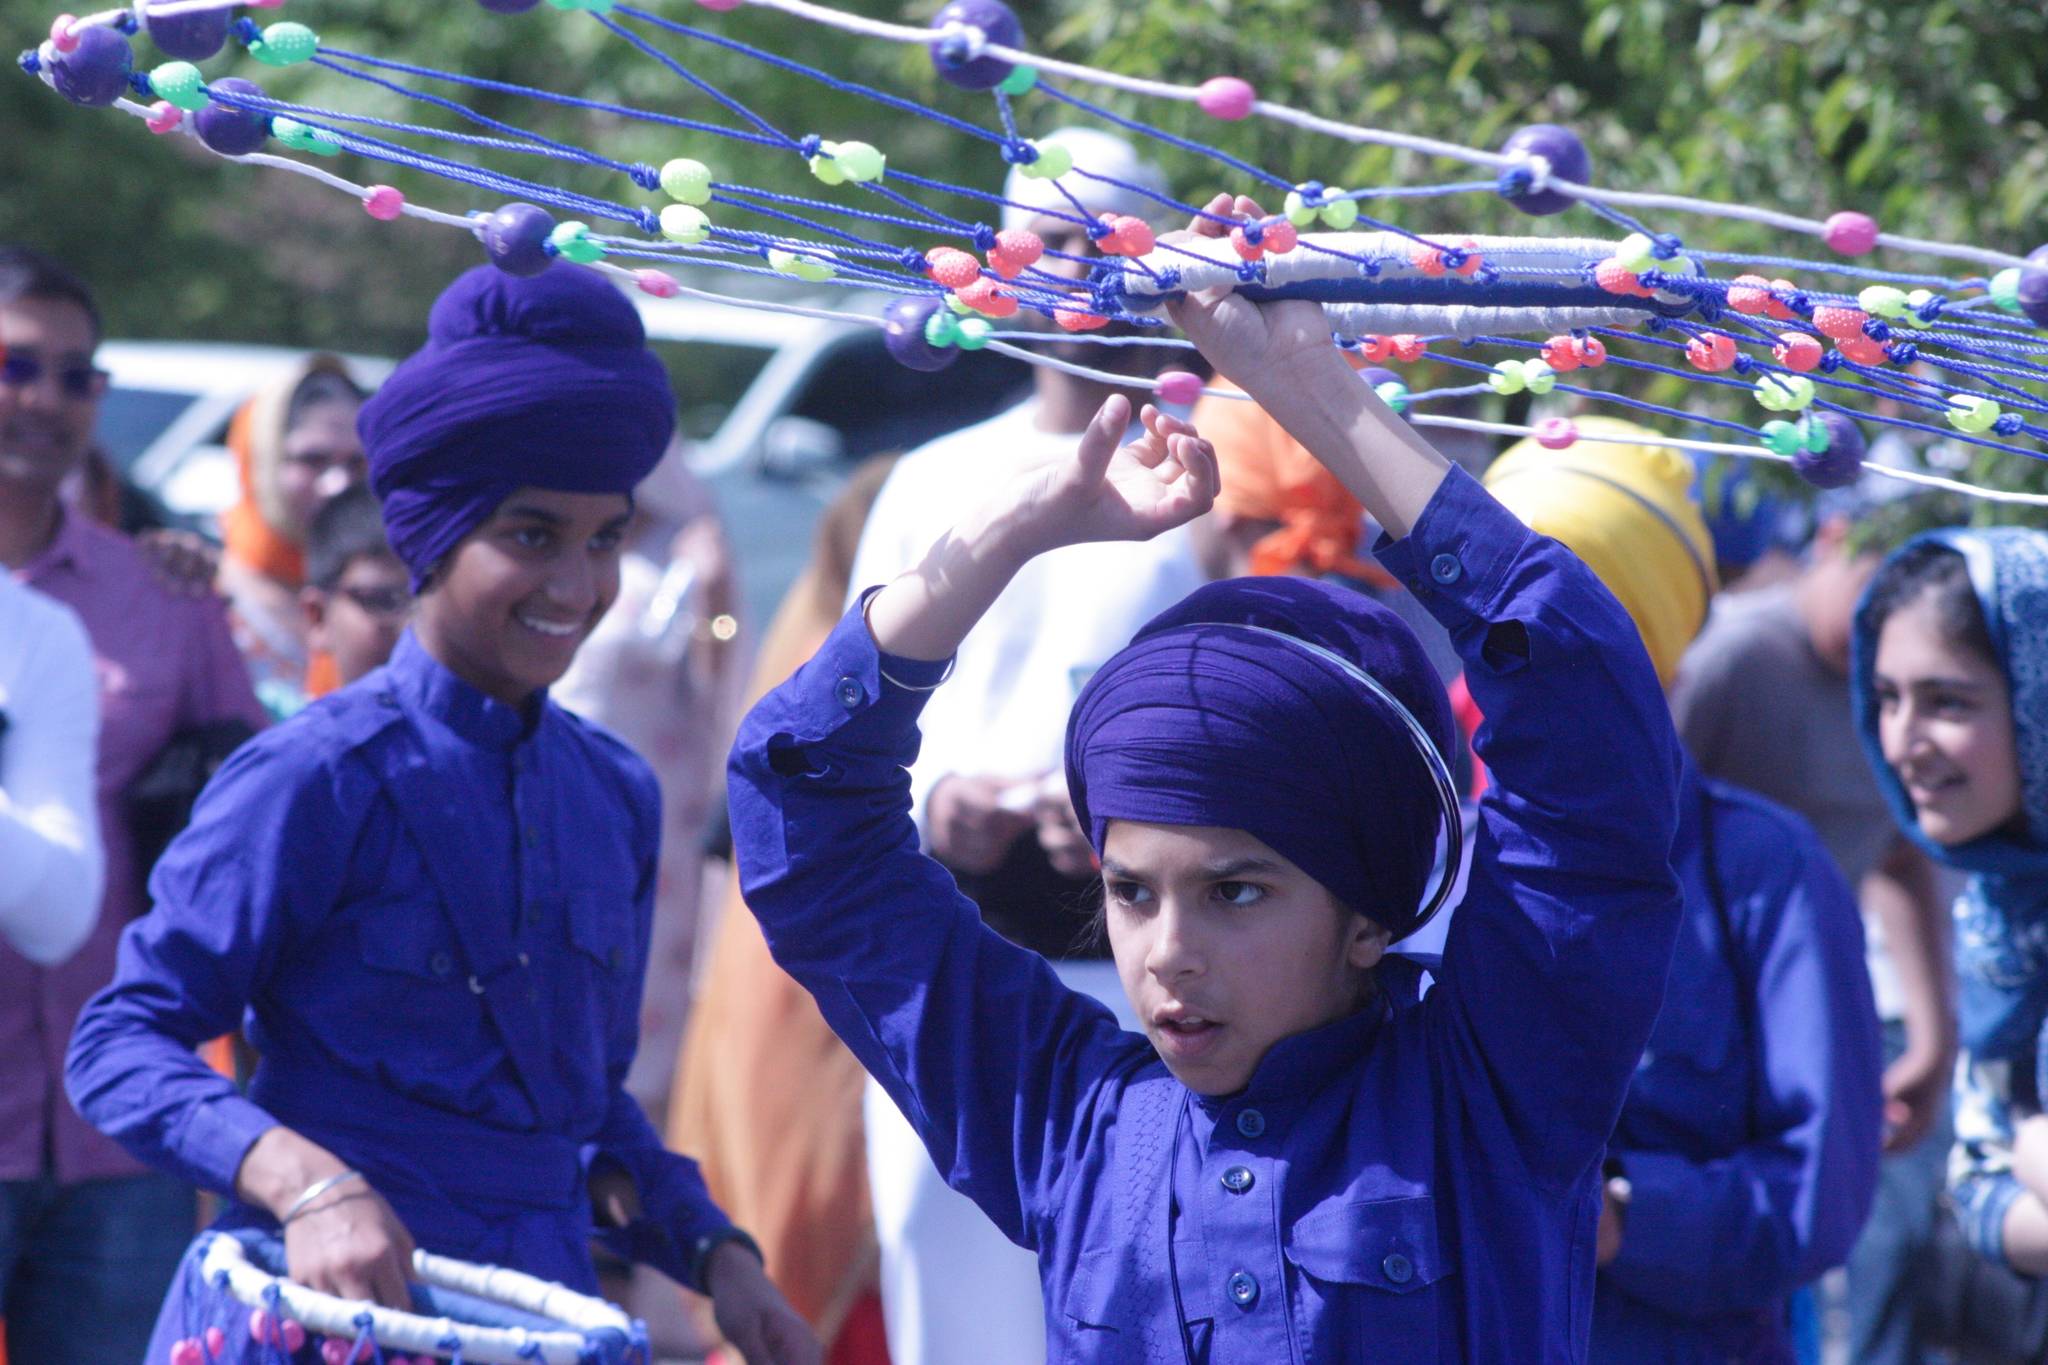 A young Sikh boy twirls a Chakkar, a ceremonial ring, during the Khalsa Day Parade in Kent on Saturday. The Chakkar was an ancient Indian weapon adopted by Sikhs as part of their standard battle gear centuries ago. MARK KLAAS, Kent Reporter